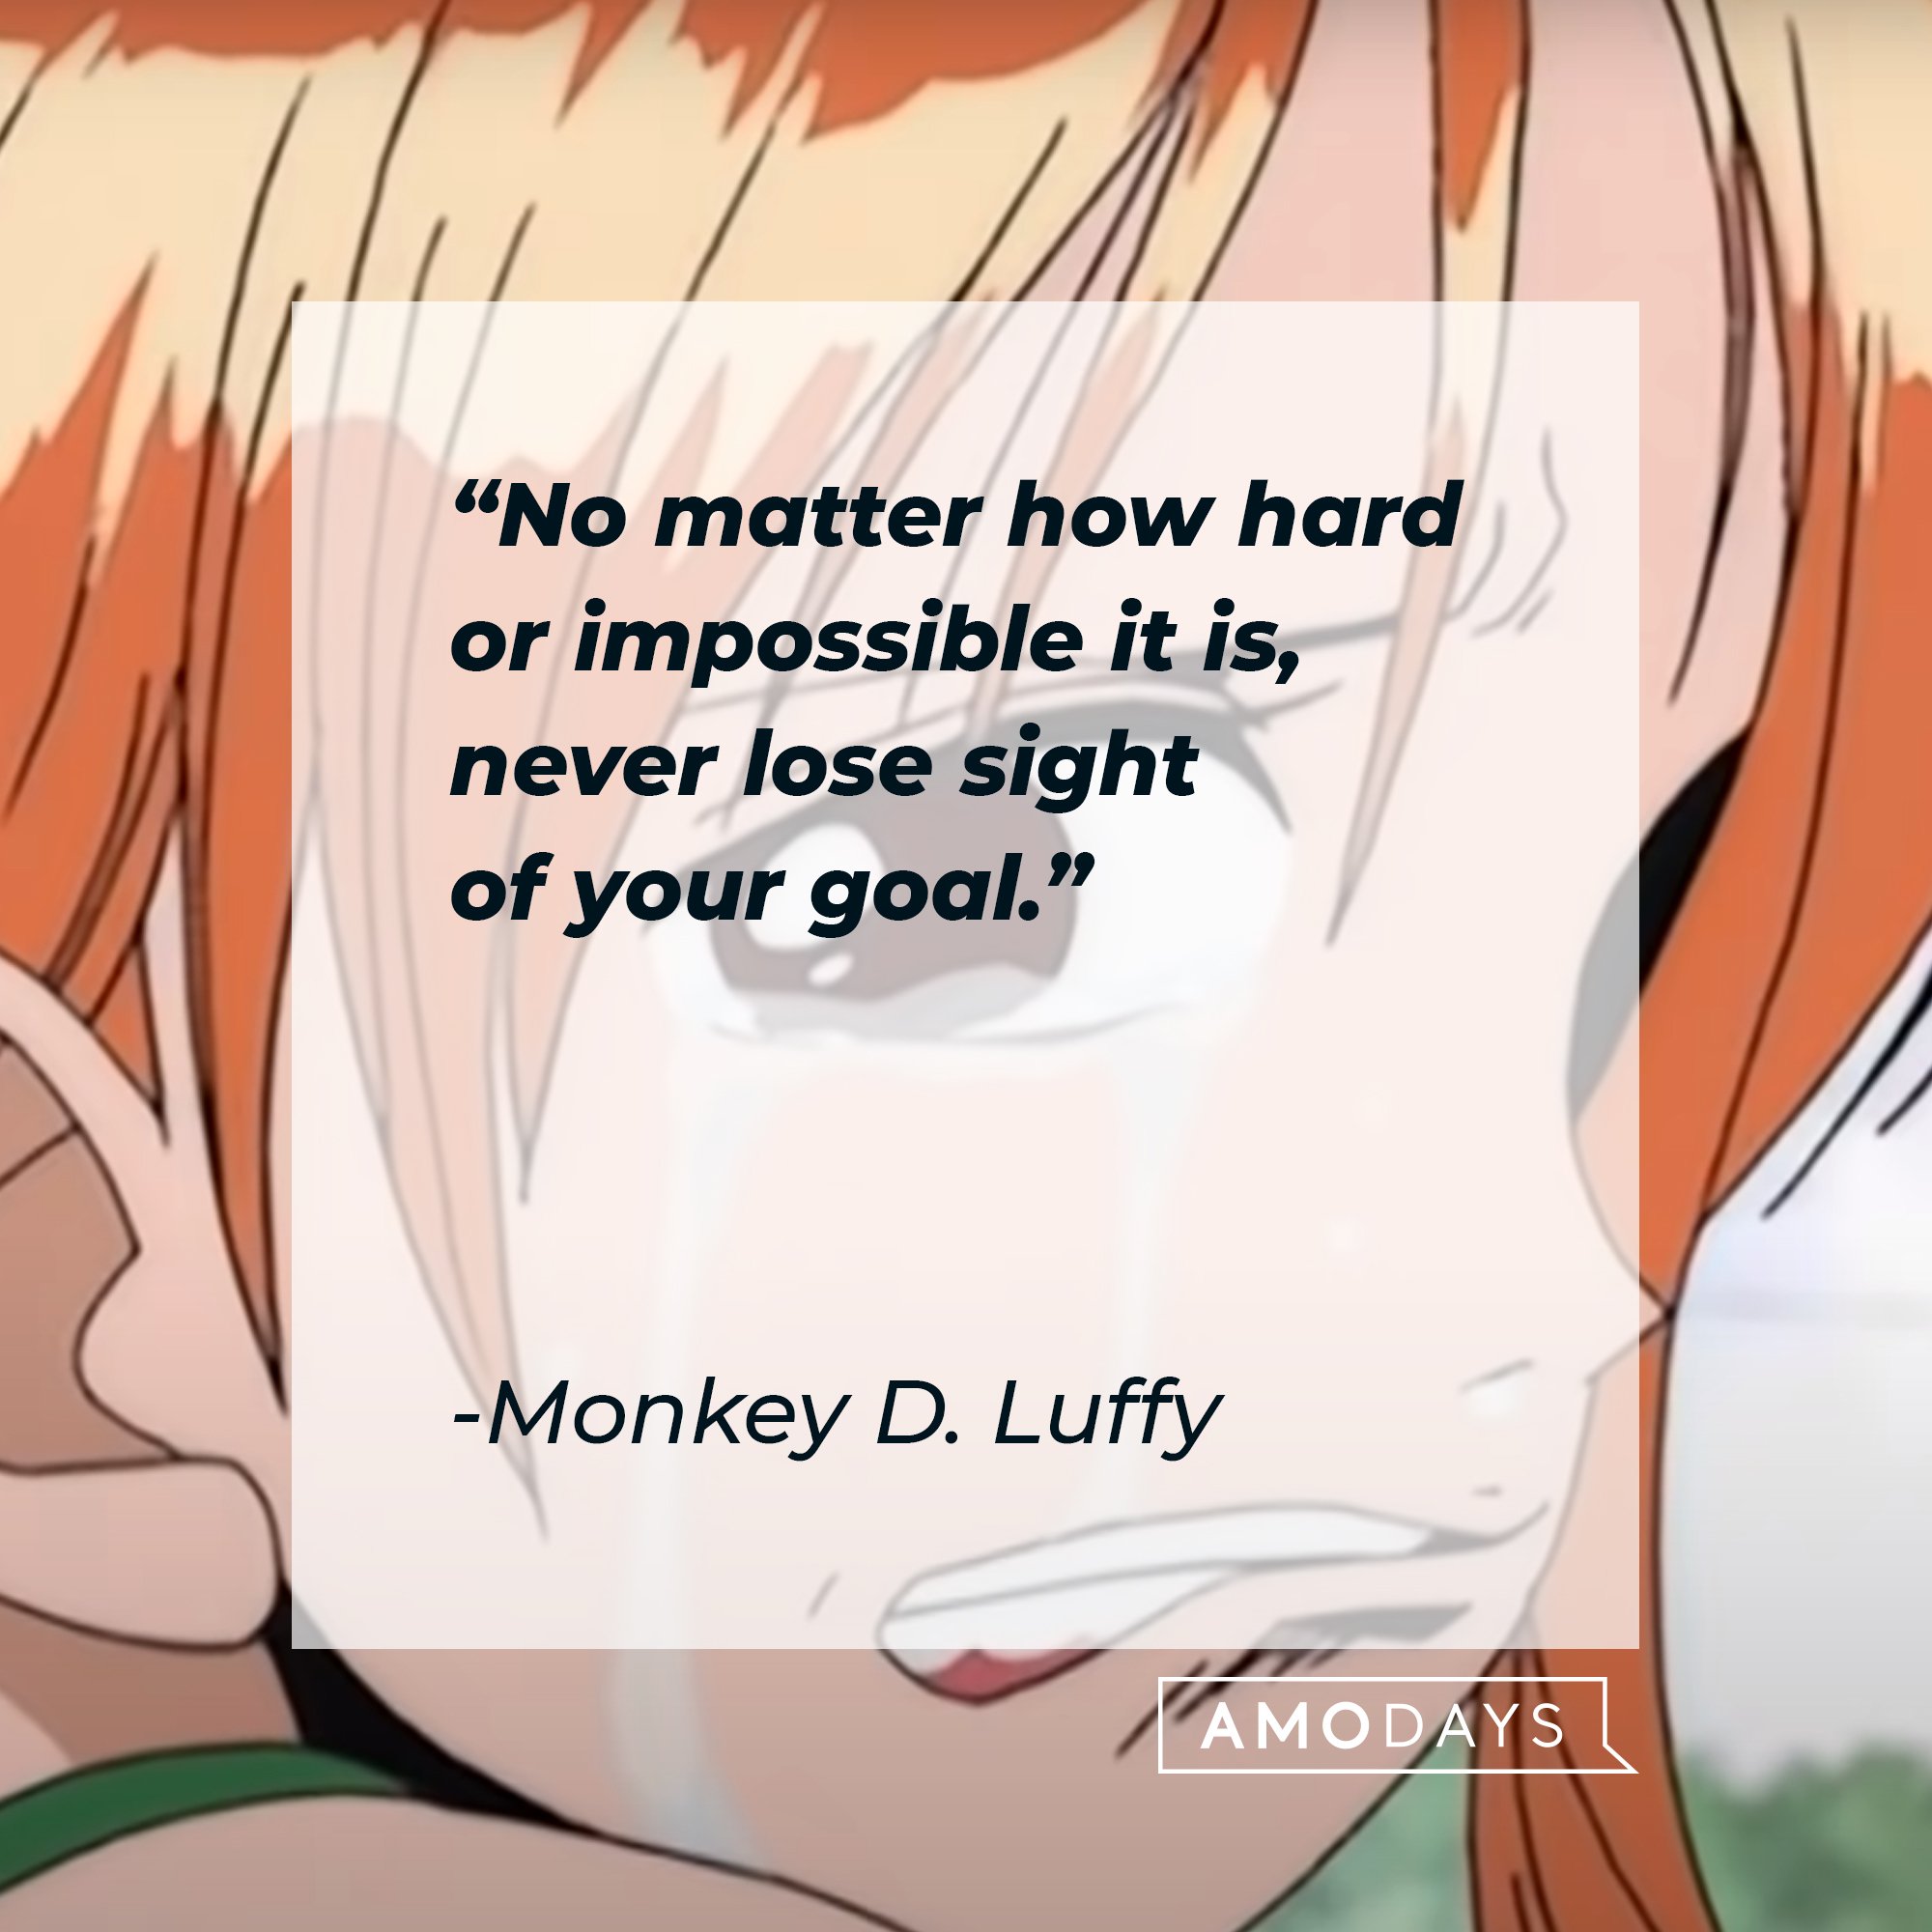 Monkey D. Luffy's quote: "No matter how hard or impossible it is, never lose sight of your goal." | Image: AmoDays